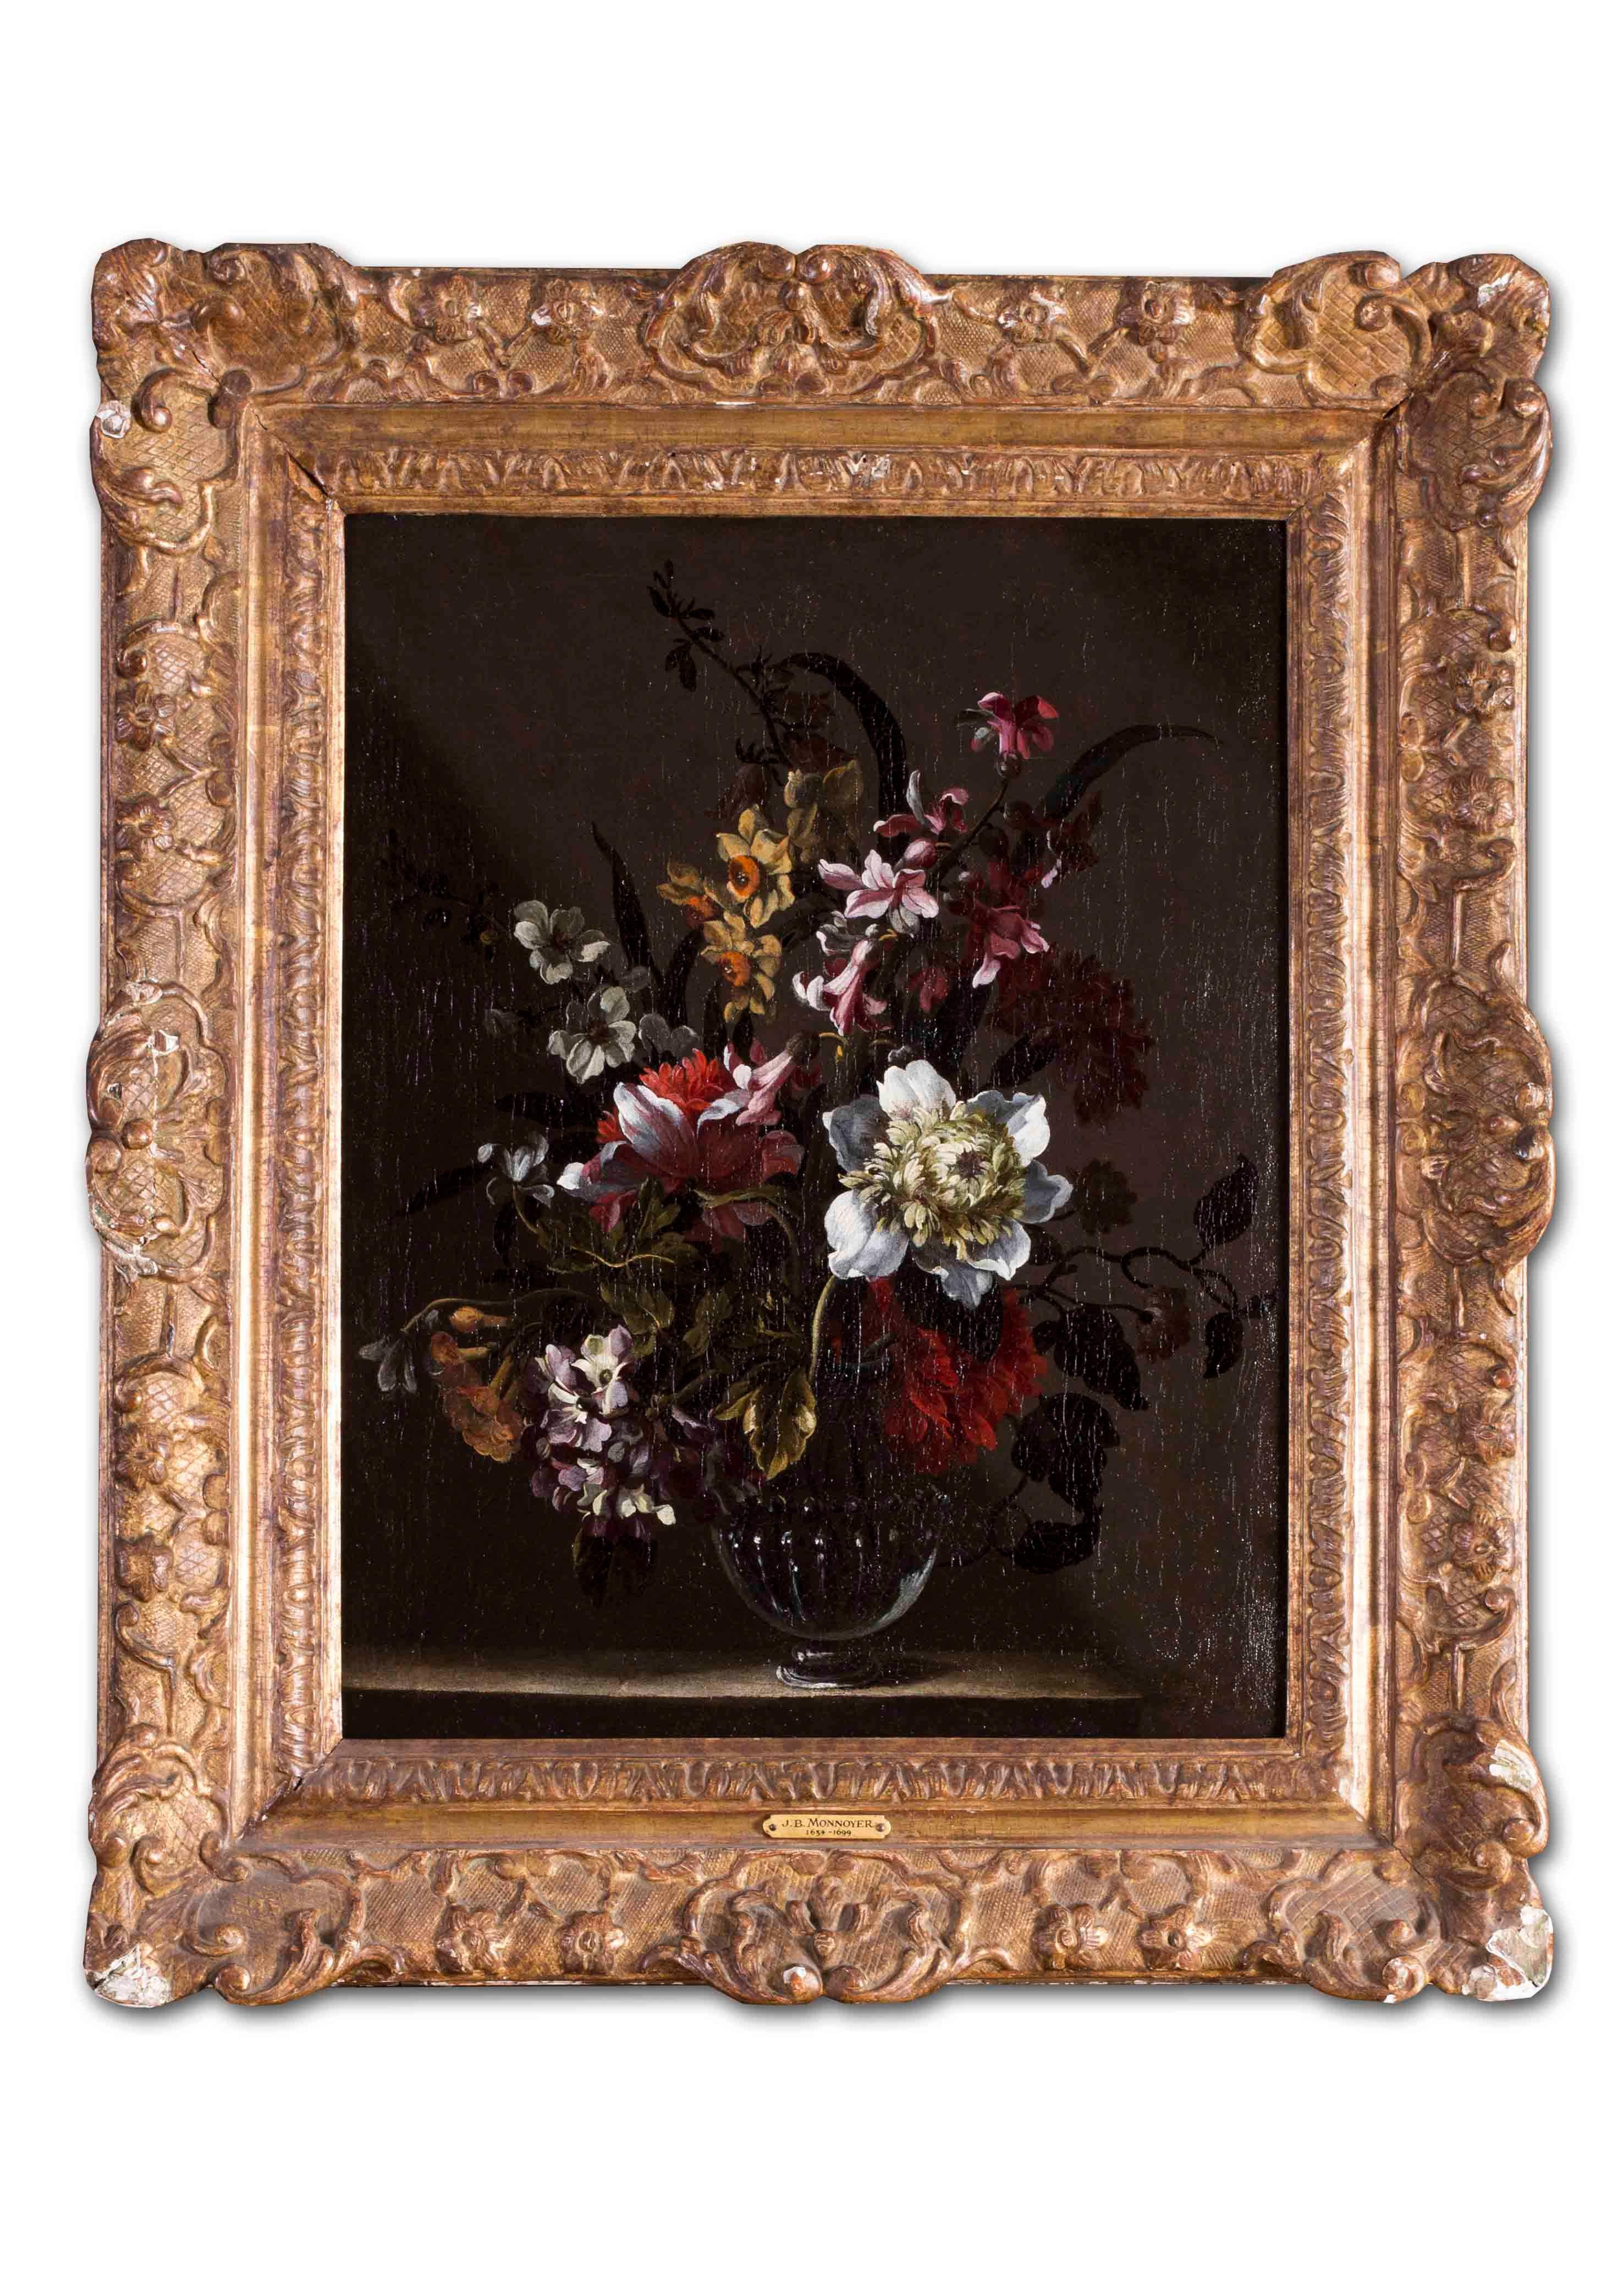 Flemish School, 17th Century Still-Life Painting - Flemish Old Master oil painting of a still life with flowers in a vase